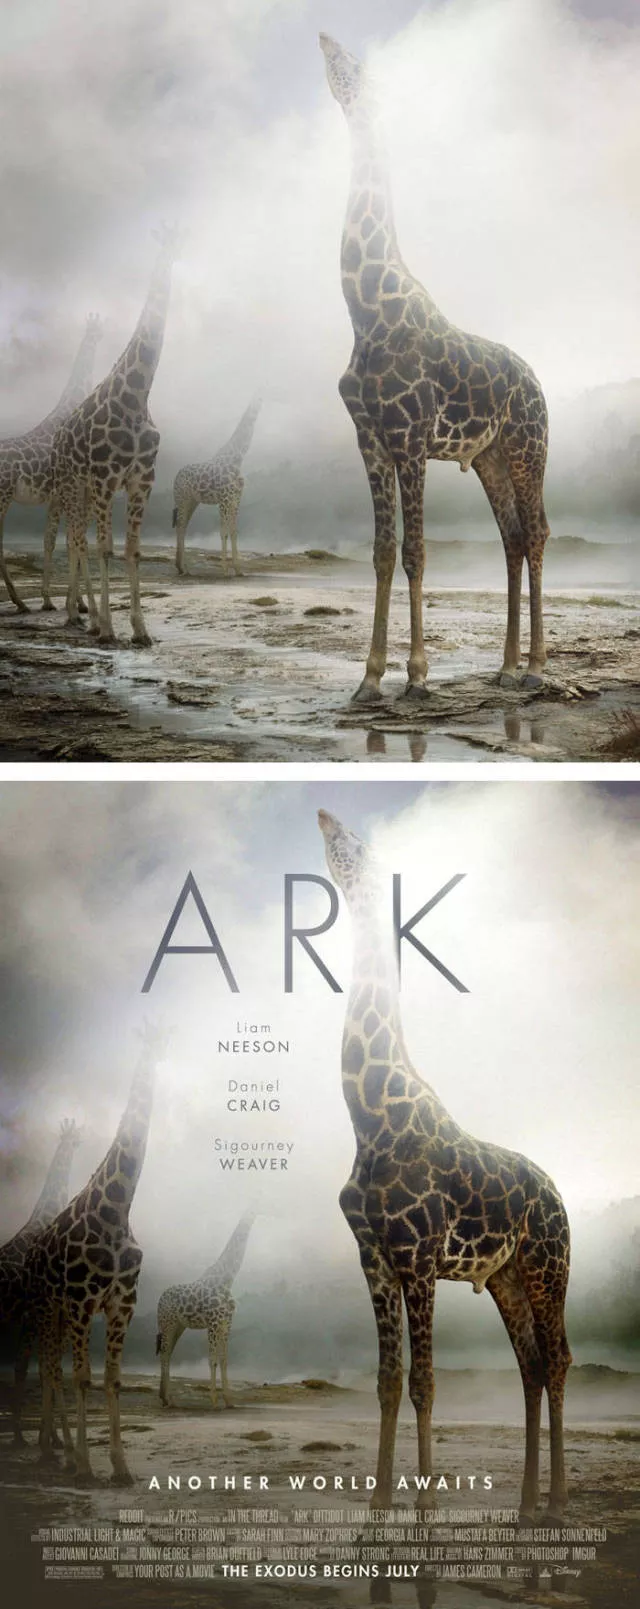 Common photos in movie posters